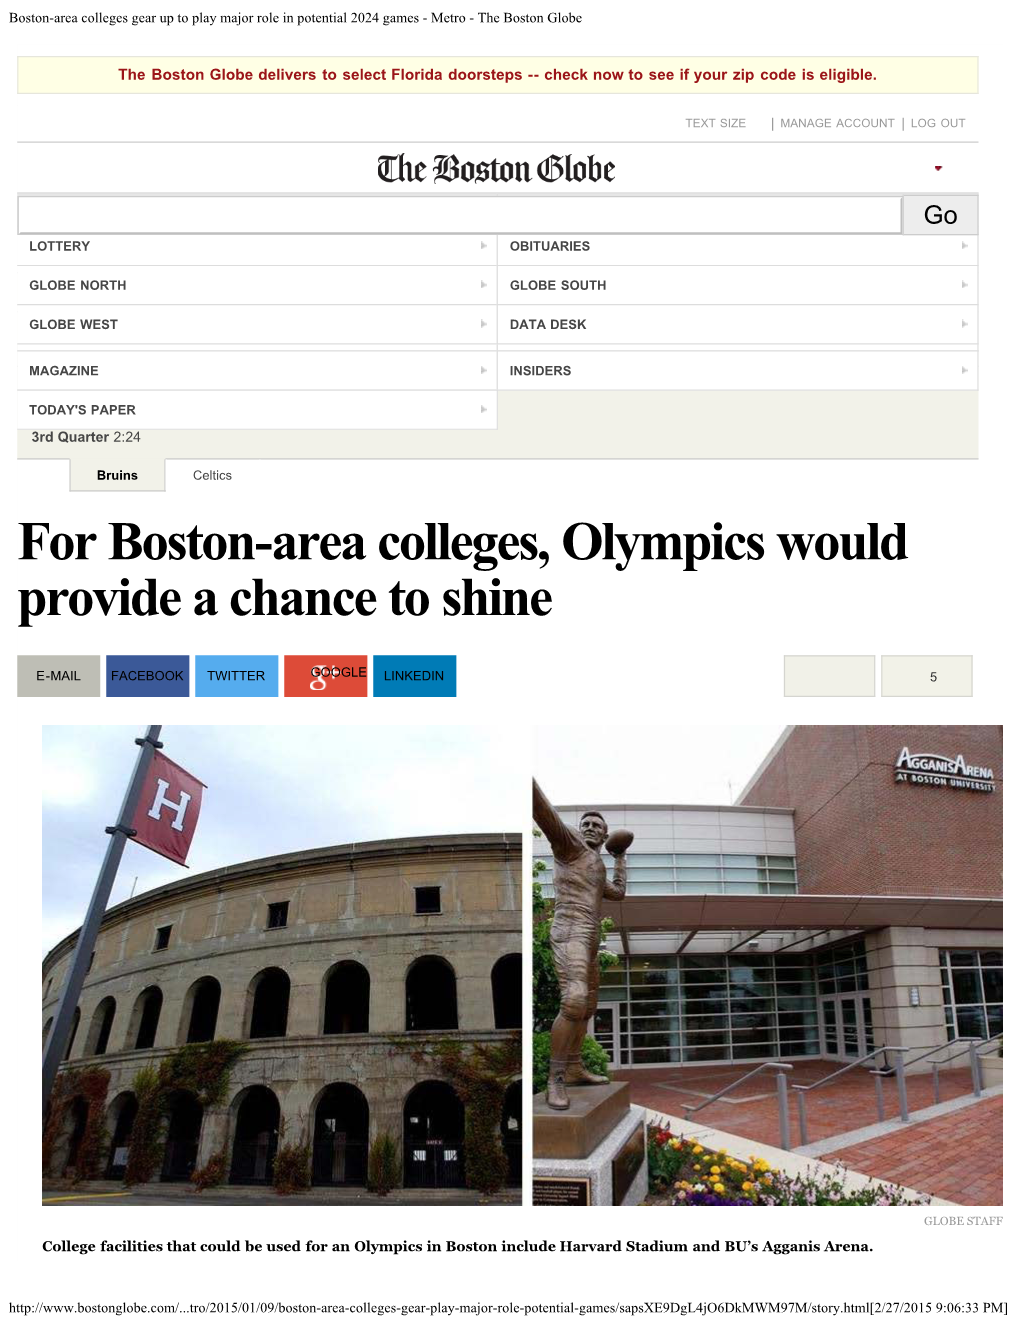 Boston-Area Colleges Gear up to Play Major Role in Potential 2024 Games - Metro - the Boston Globe